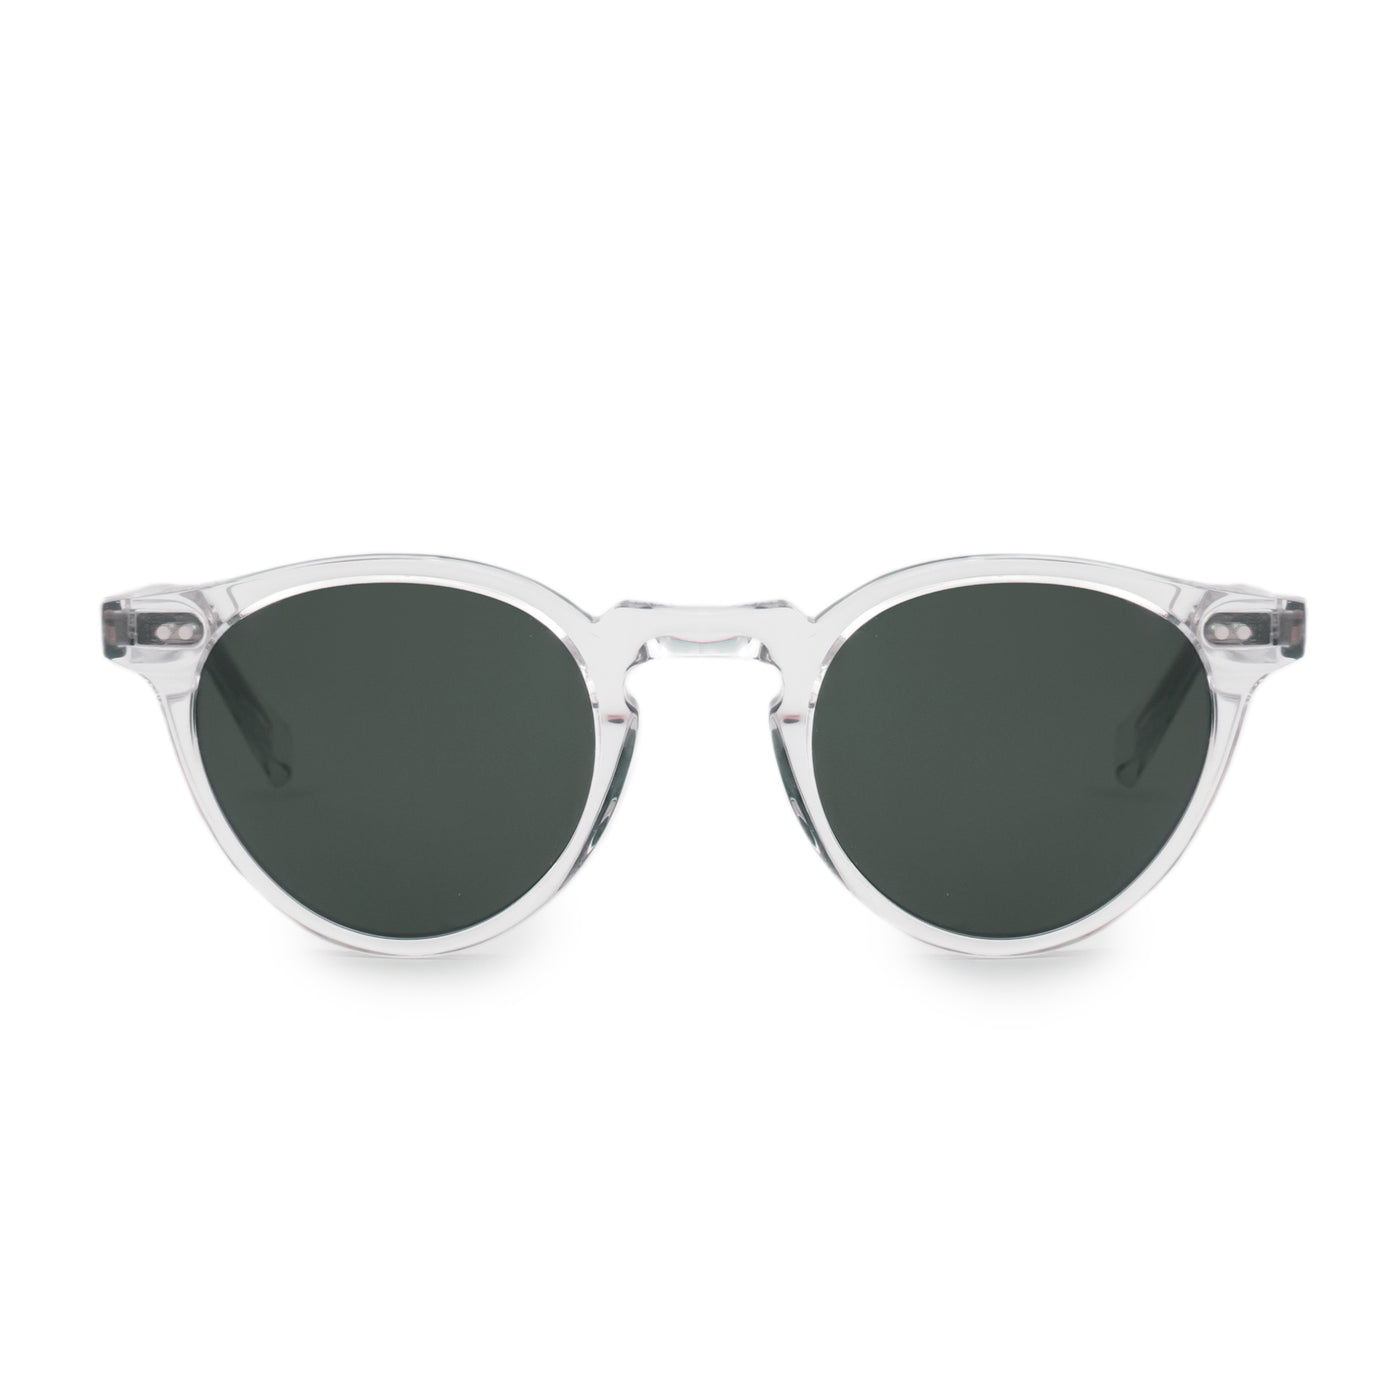 Monokel Forest Crystal Sunglasses Green Solid Lens front